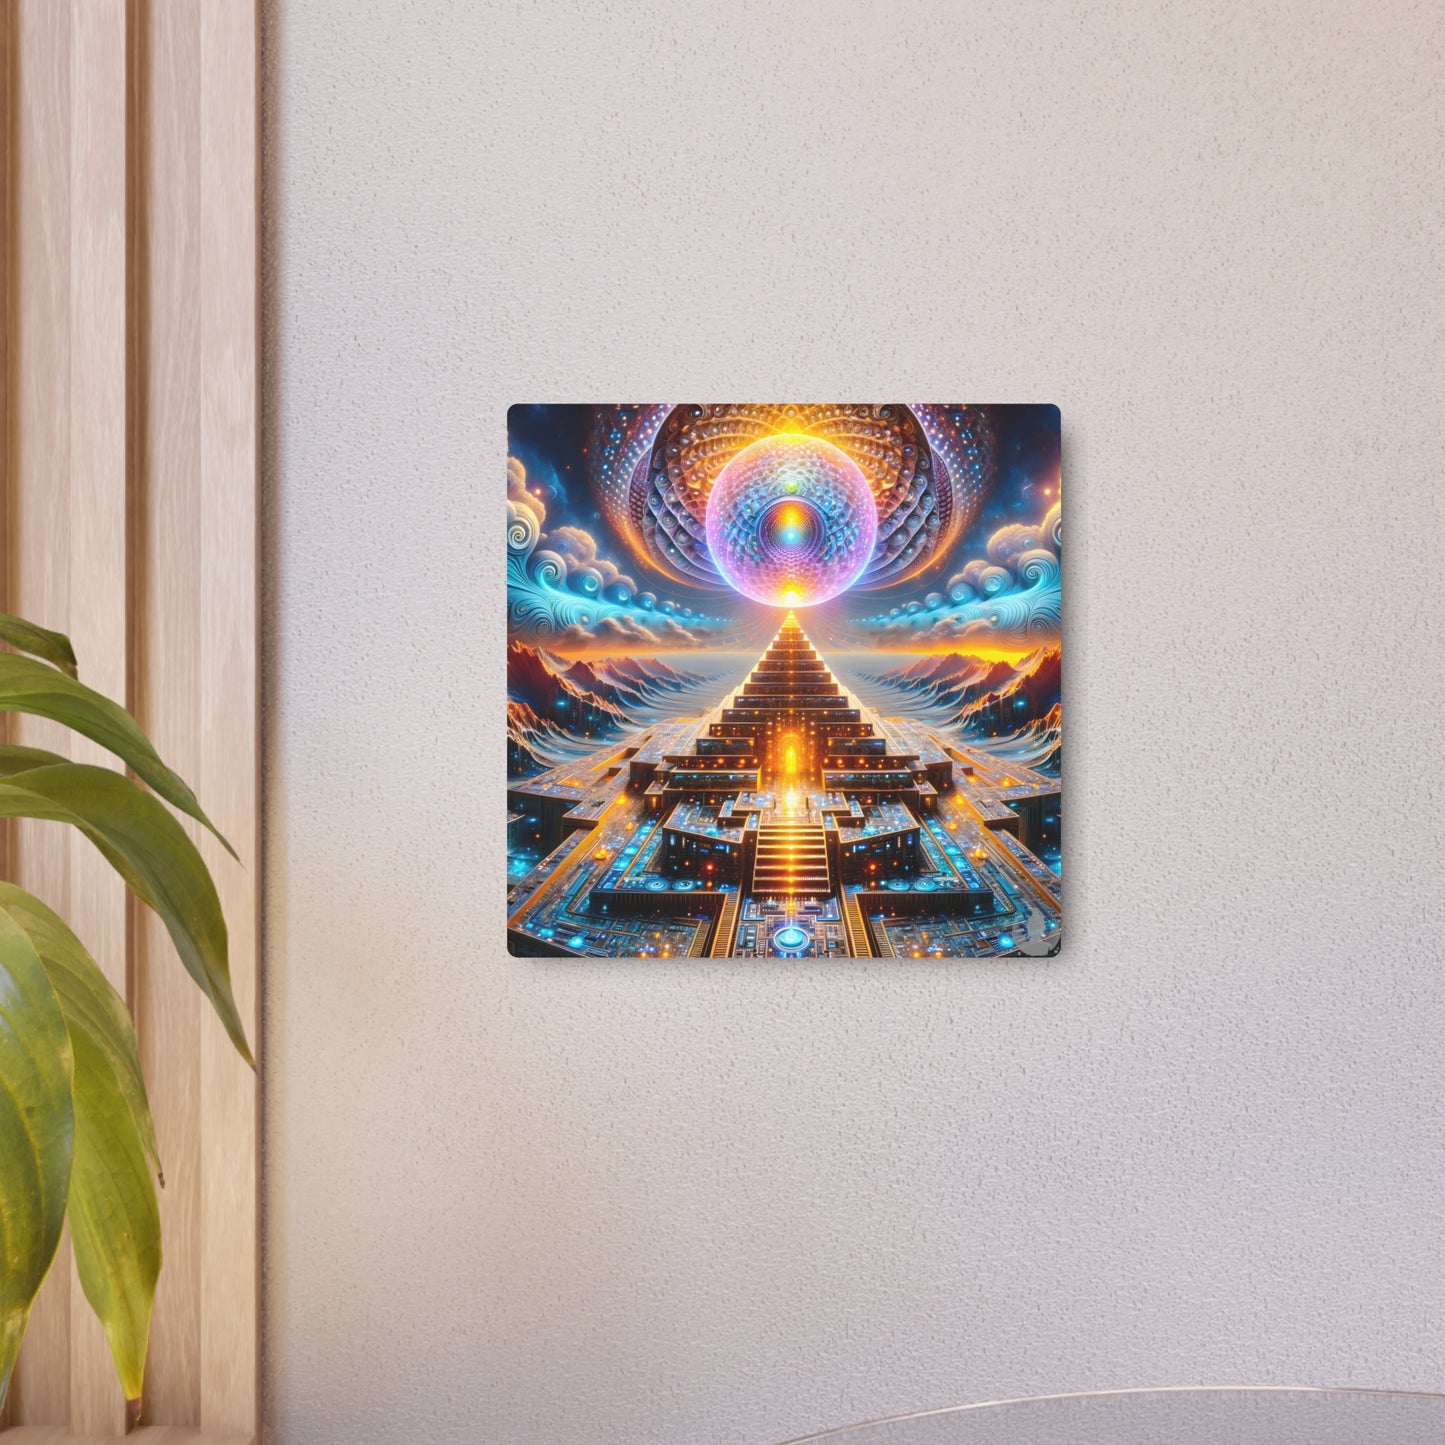 Recursive Technology Metal Print by Meta Zen - Psychedelic Visionary Trippy Art Friend Lover Boyfriend Girlfriend Mother Father Sister Brother Gift